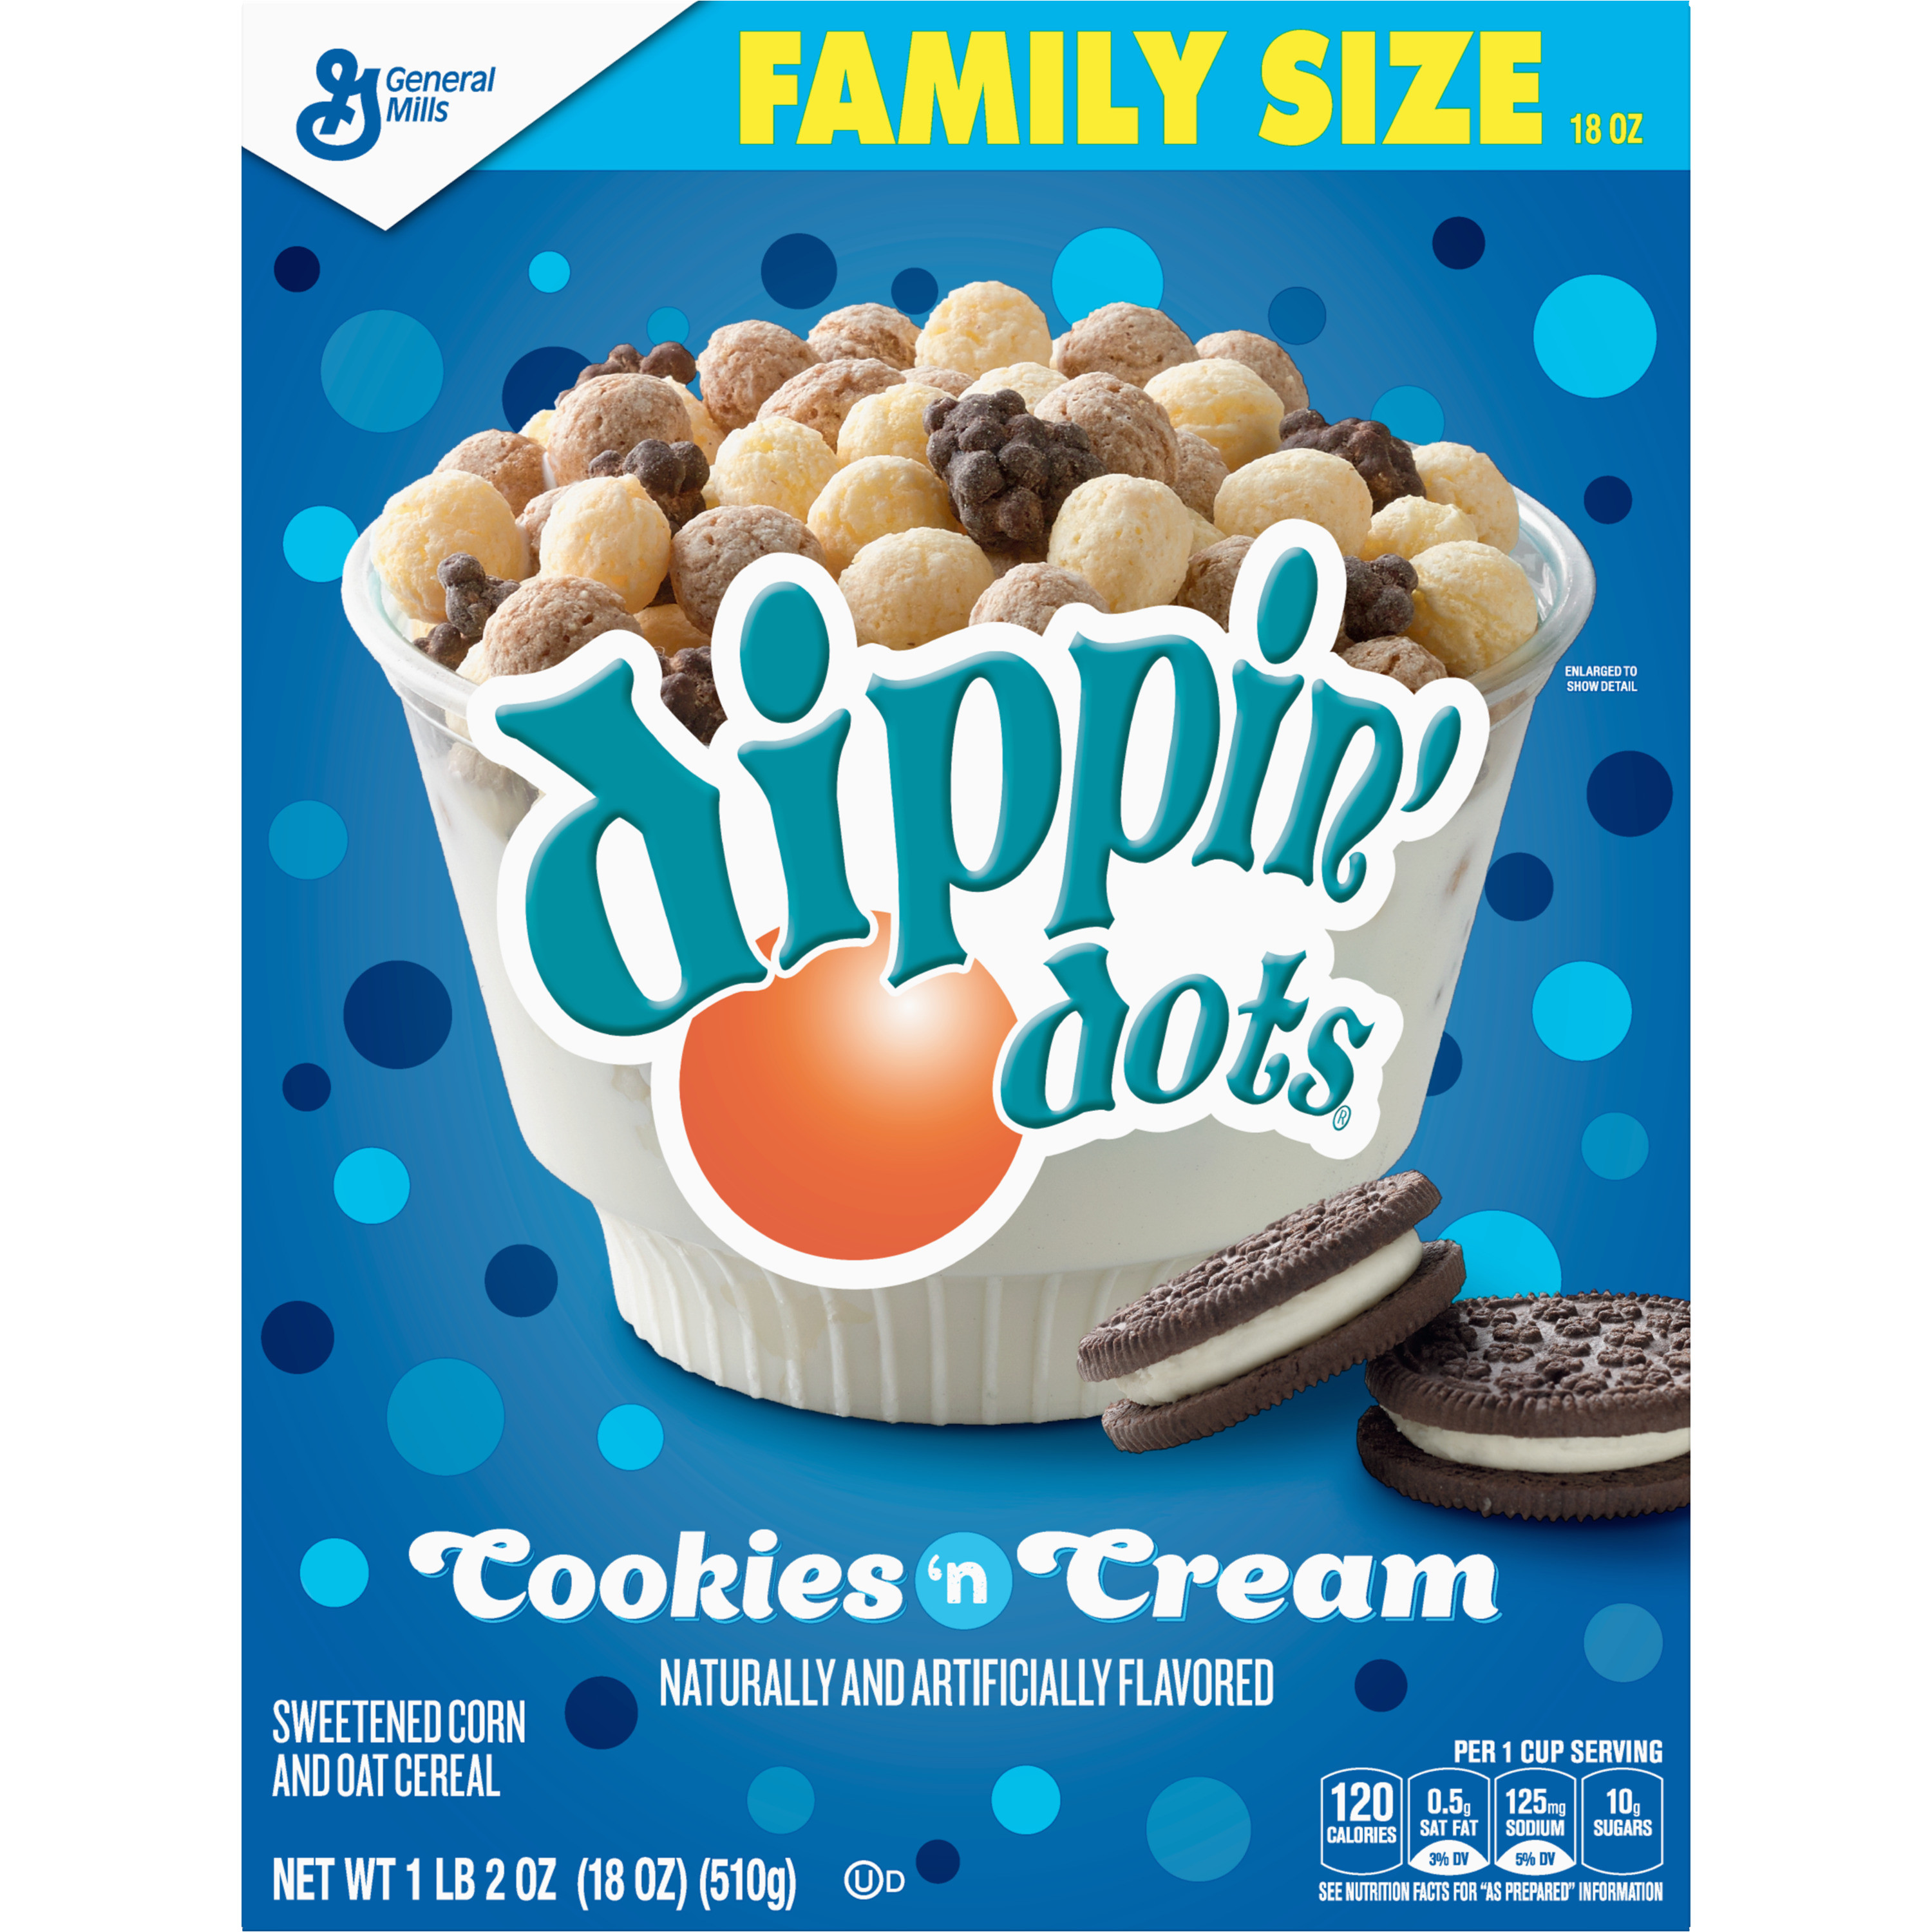 Cookies by Design Melbourne Fl Dippin Dots Cookies Cream Flavored Cereal Family Size 18 Oz Box